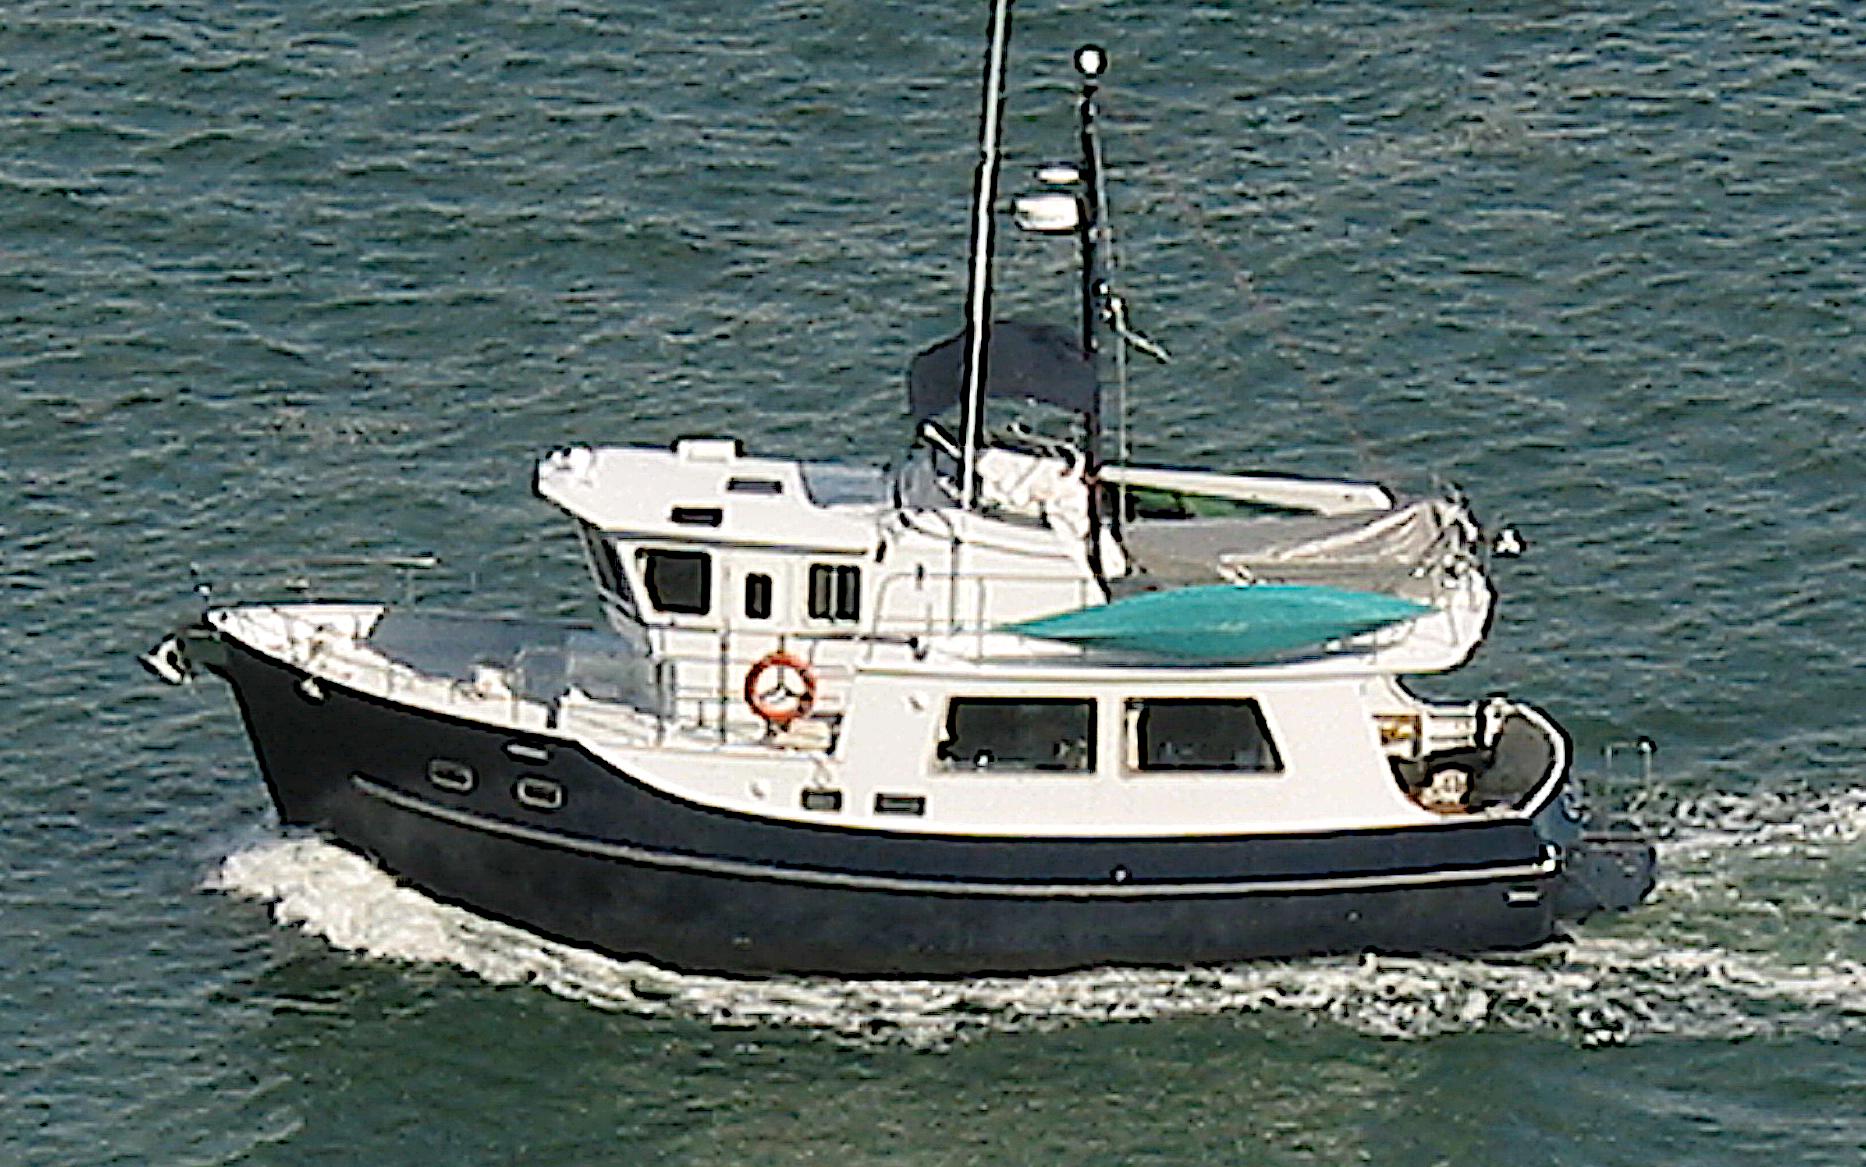 Pacific - Yachts Seahorse Yachts - Ocean for Sale